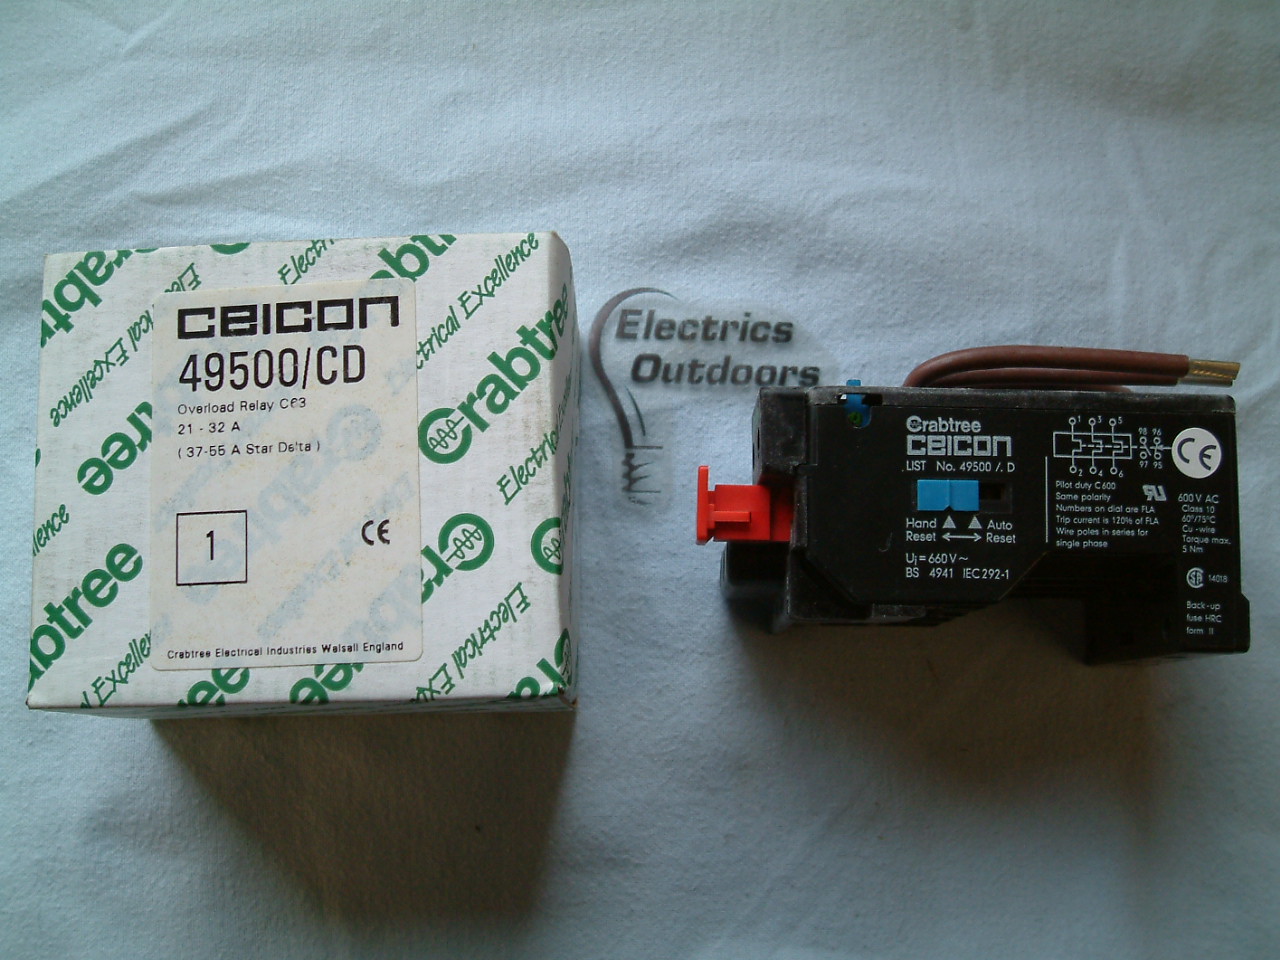 CRABTREE CEICON OVERLOAD RELAY C63 21 - 32 A 49500/CD